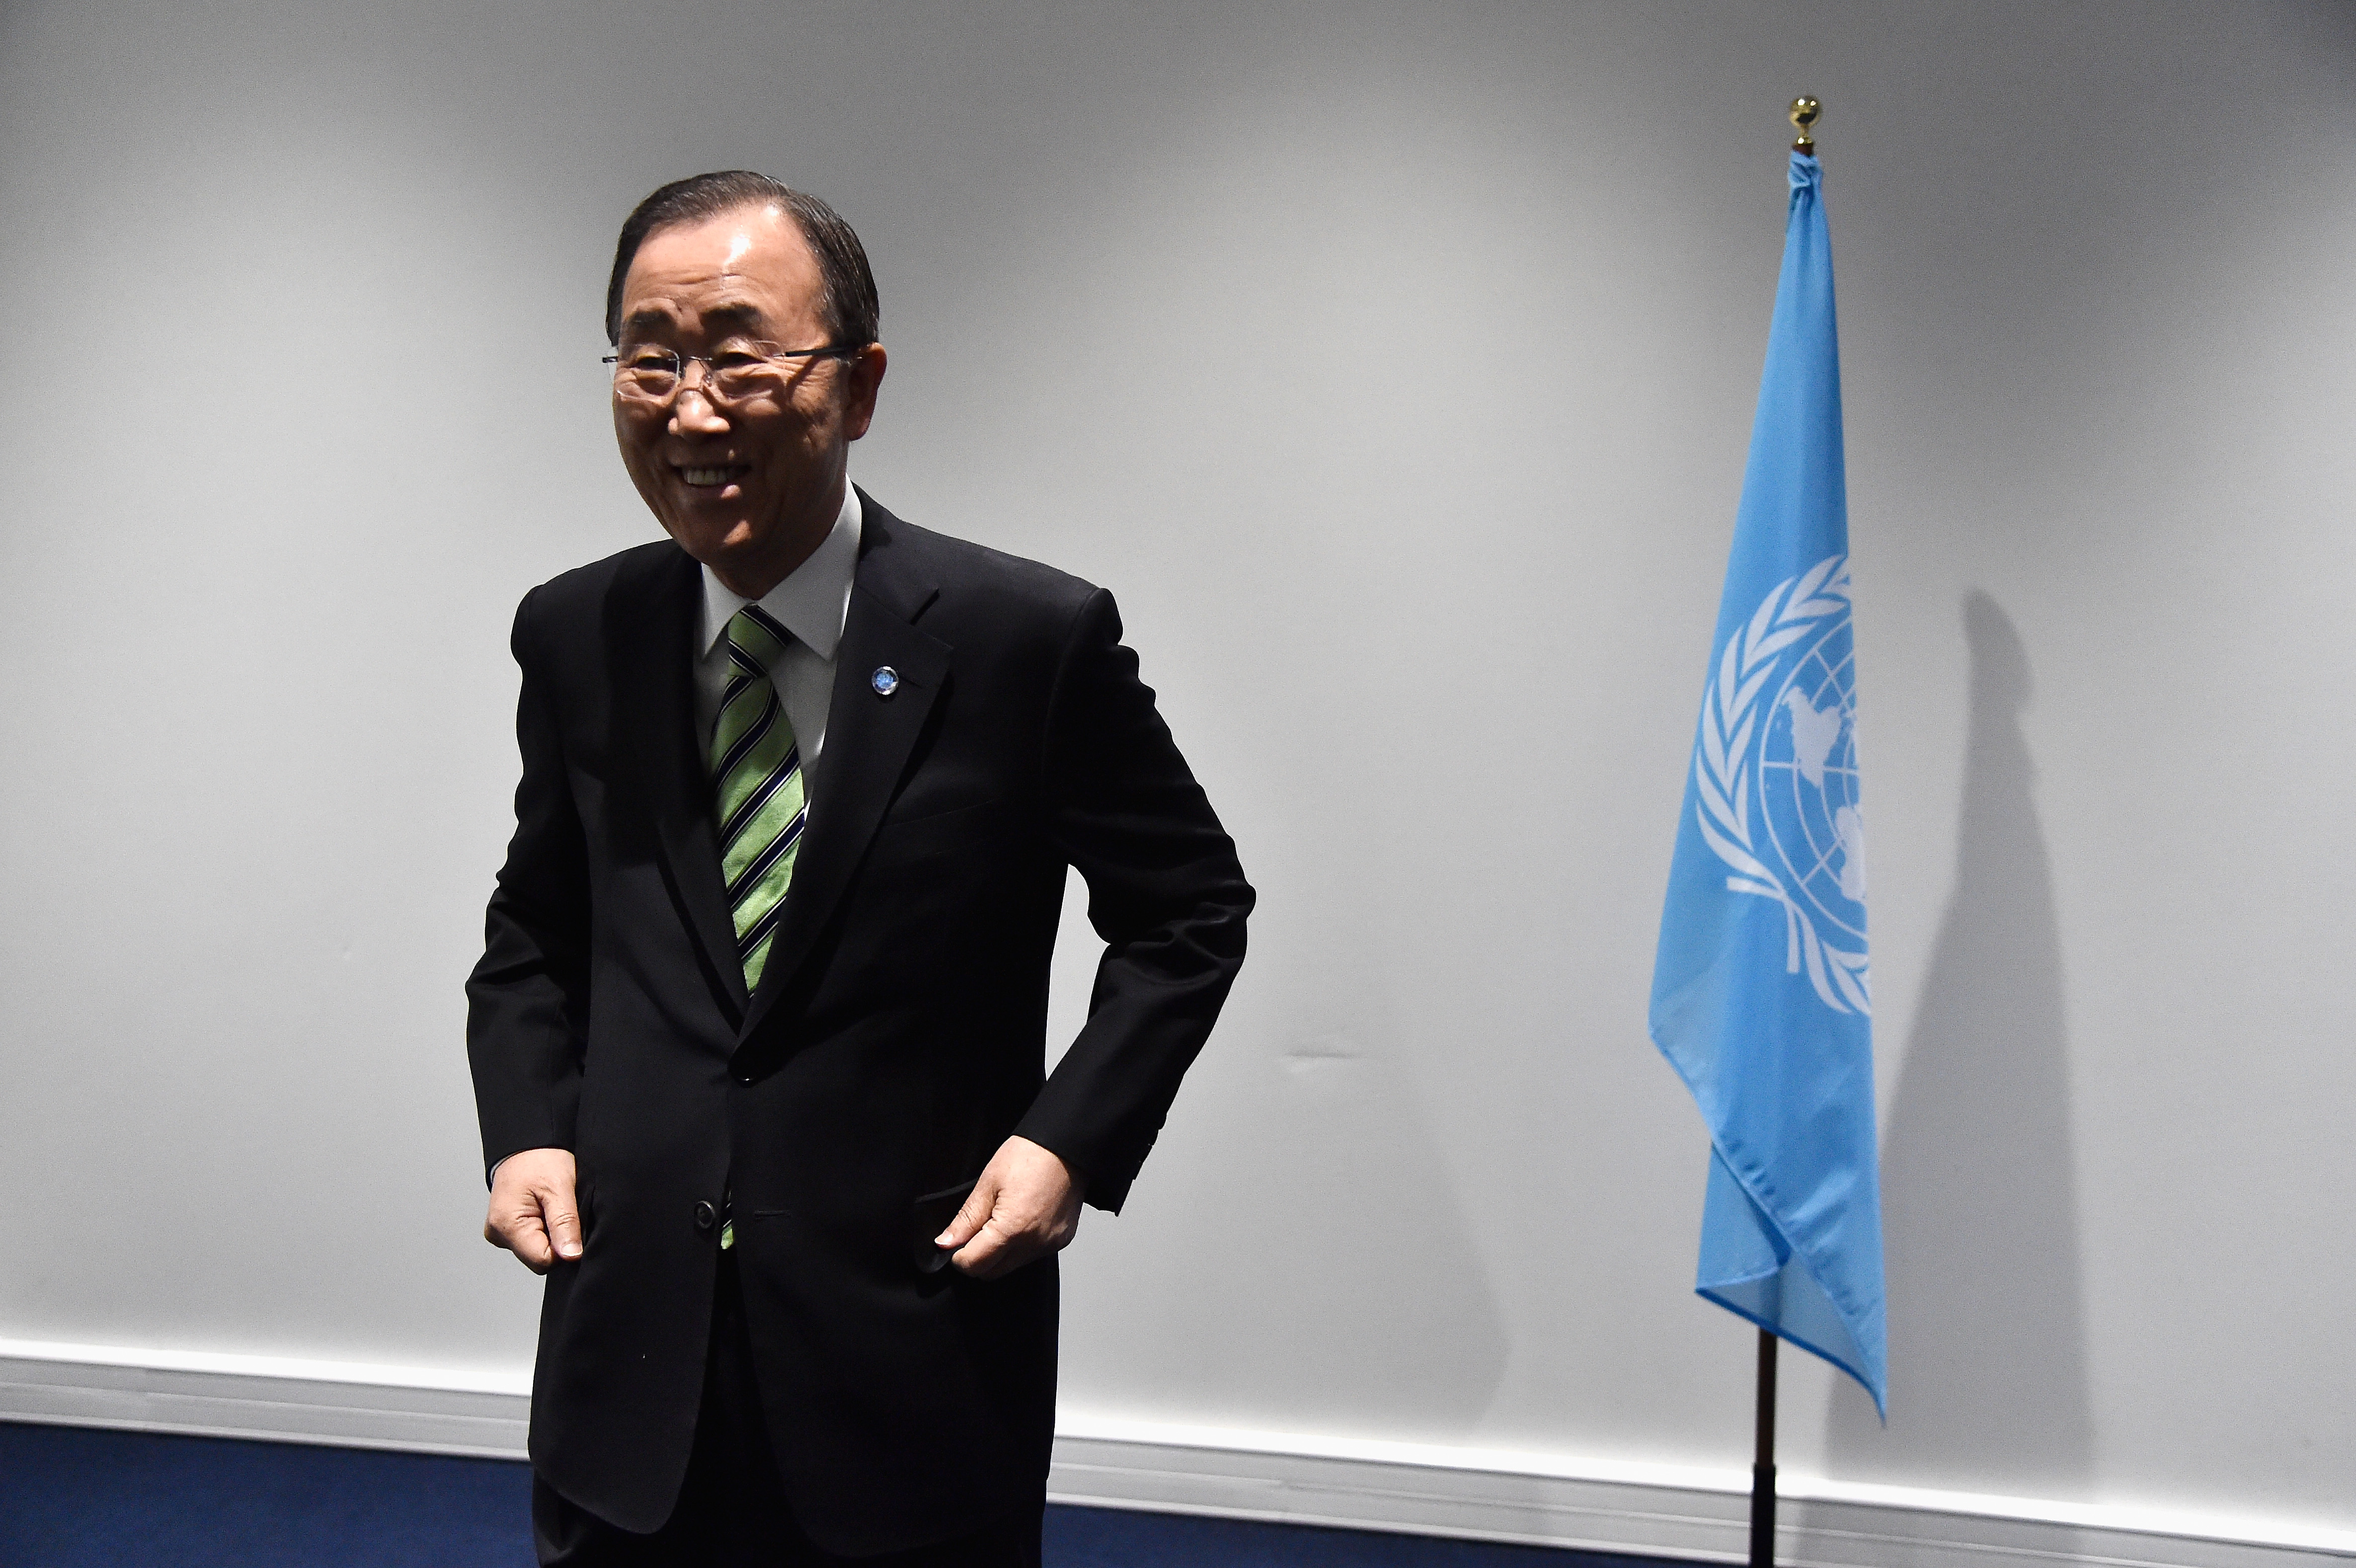 UN Secretary-General Ban Ki-moon has expressed his happiness over the conclusion of the Paris climate summit. Photo: Pascal Le Segretain/Getty Images